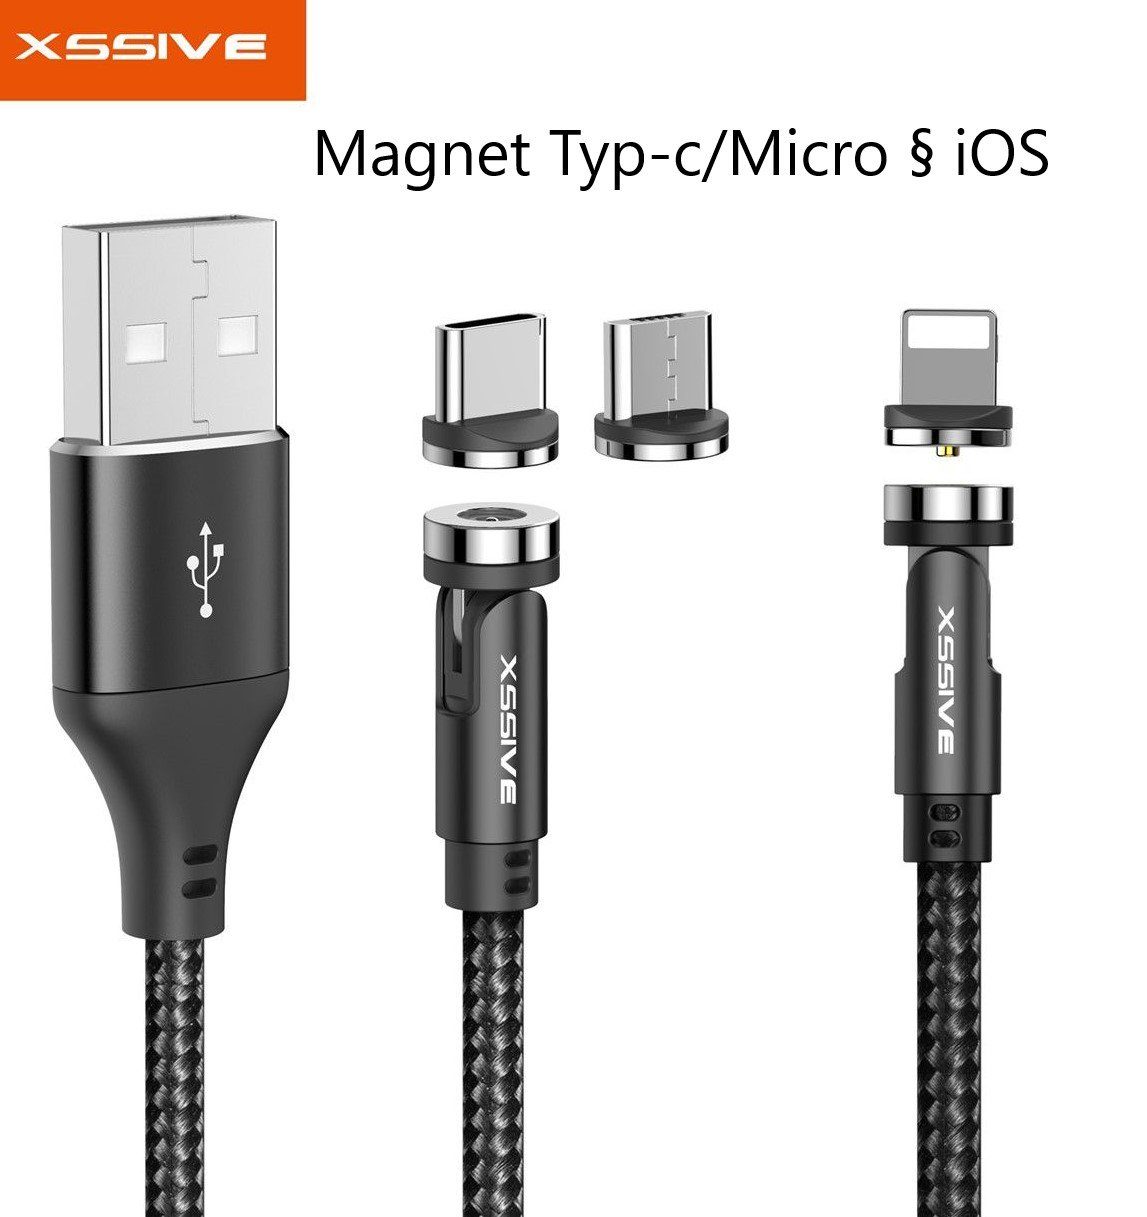 Xssive Charge & Sync Magnet Cable USB to IOS-TYP_C-MICRO Handy -Tablett magnetisches Ladekabel, USB Typ C-Micro, Lightning, Magnetischer Anschluss (100 cm), 2.4A Schnell-Ladekabel